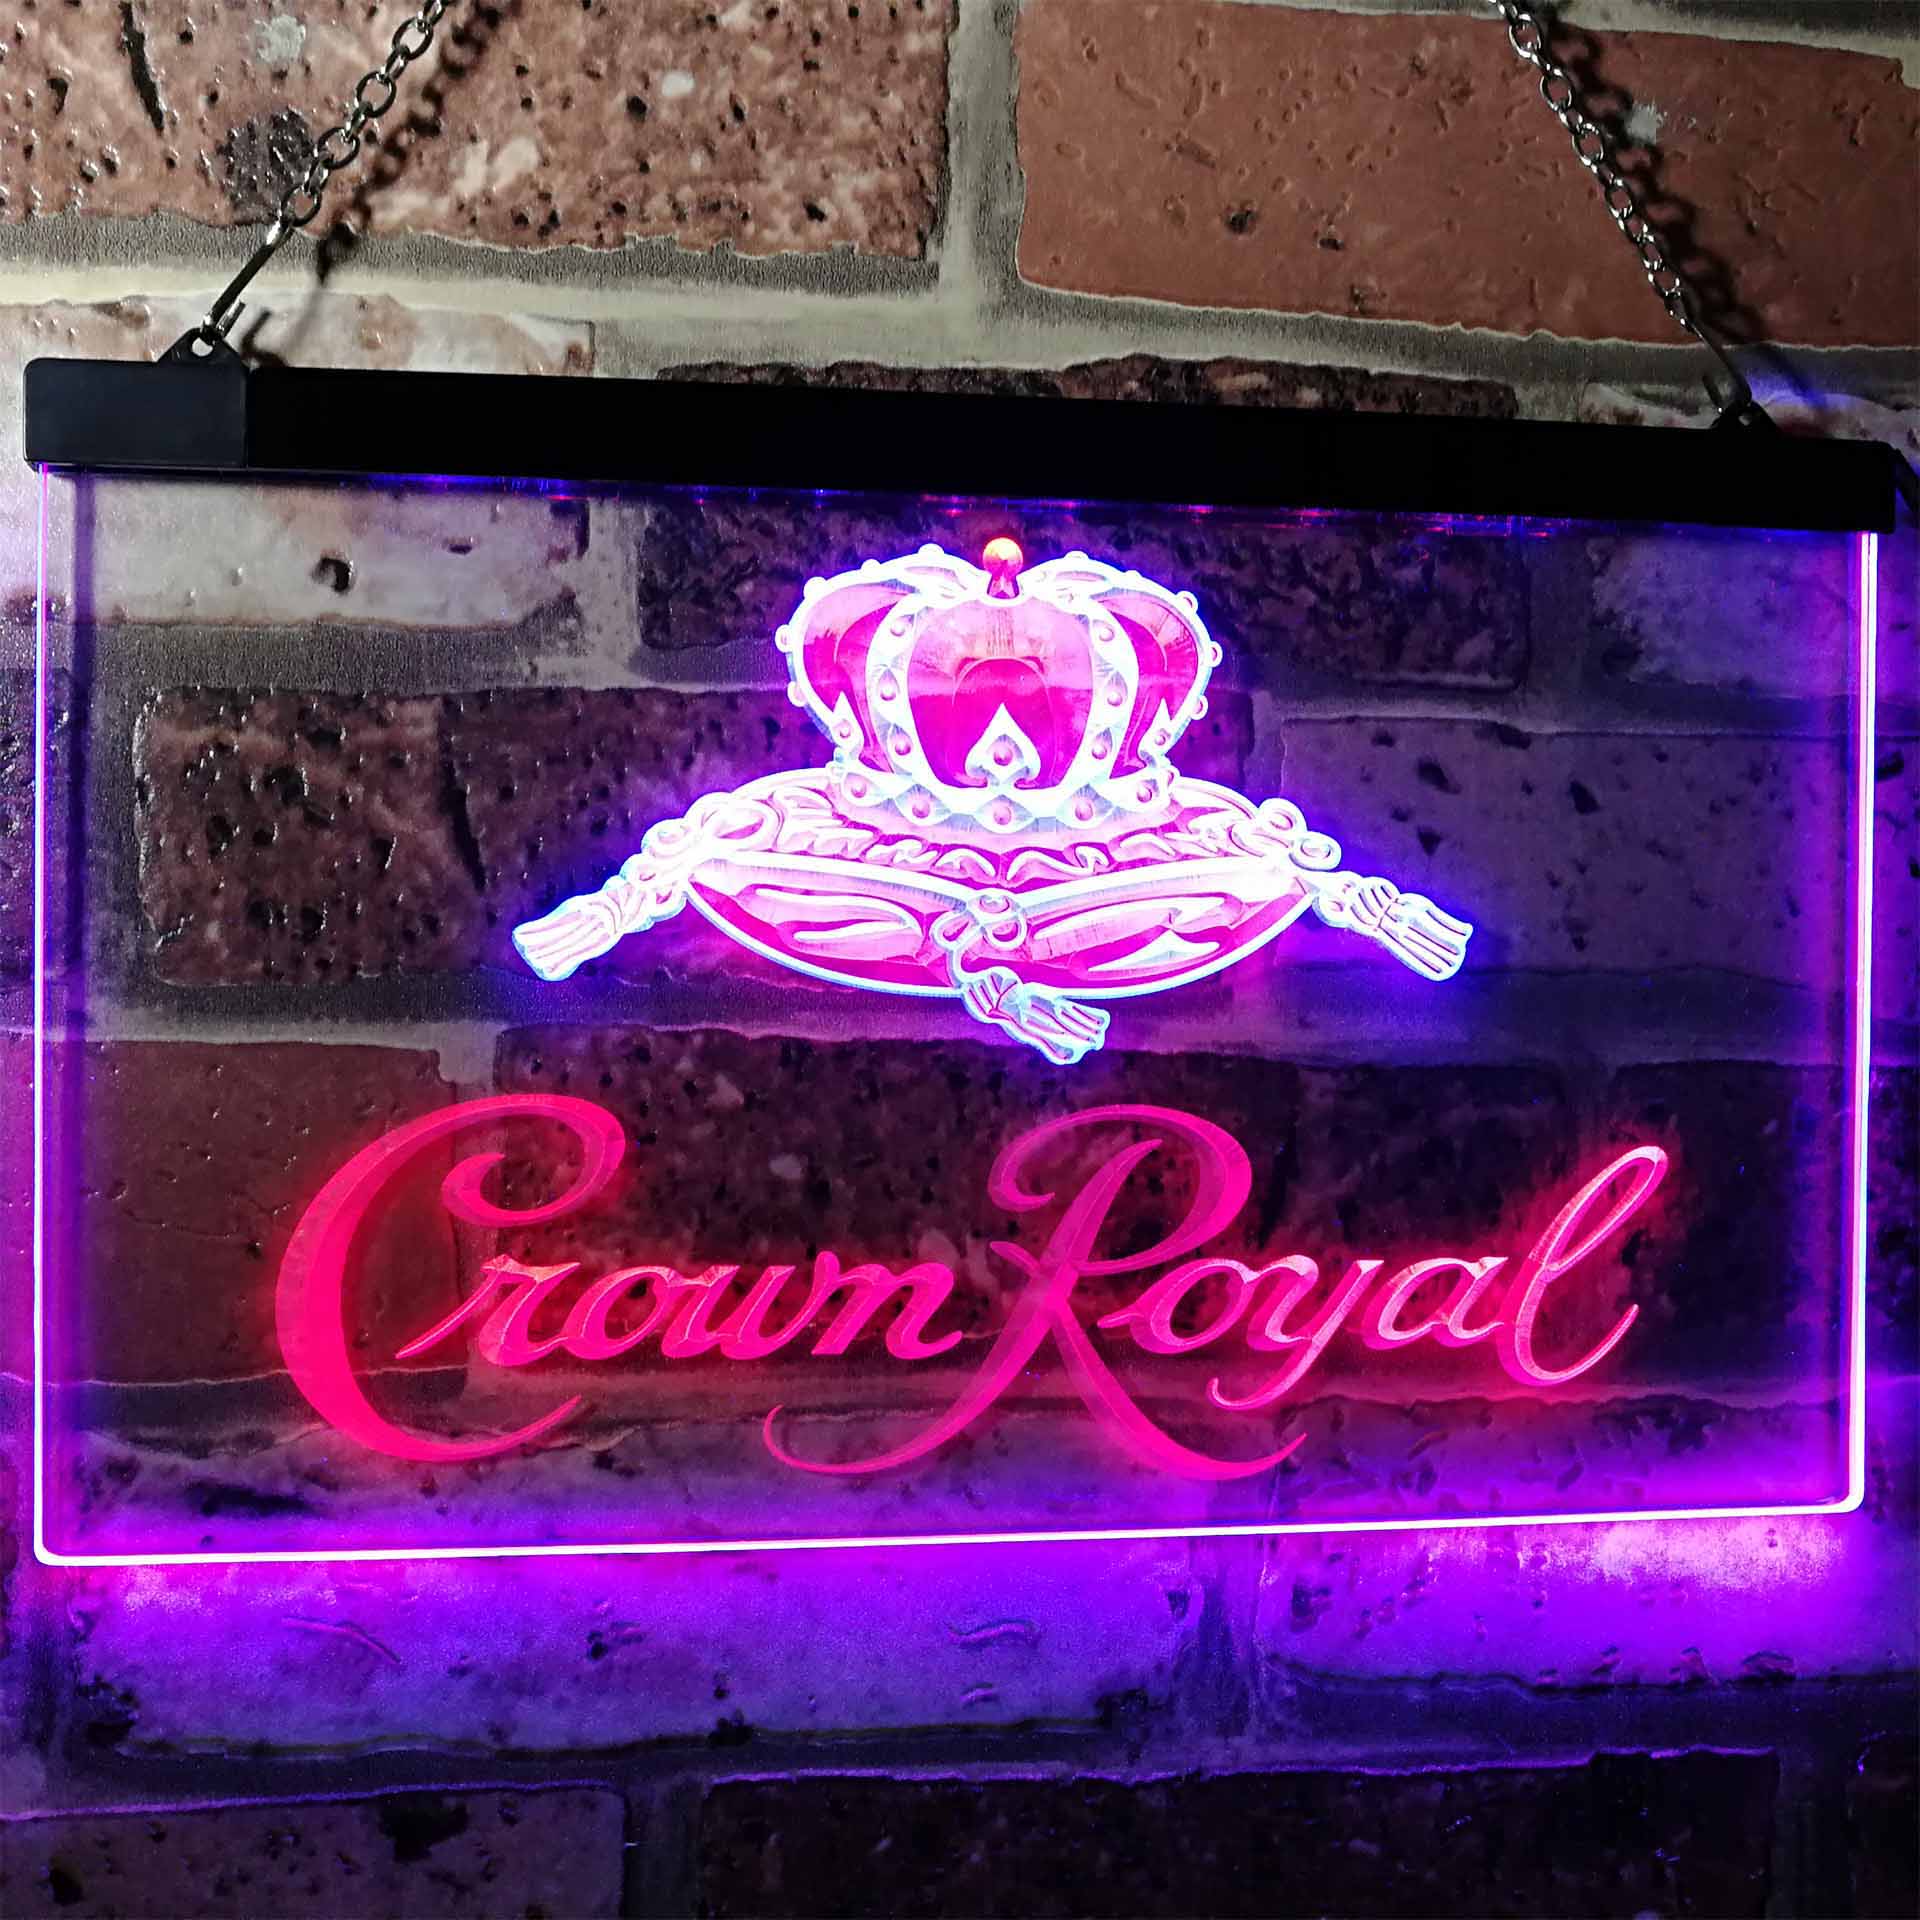 Crown Royal Beer Bar A Dual Color LED Neon Sign ProLedSign